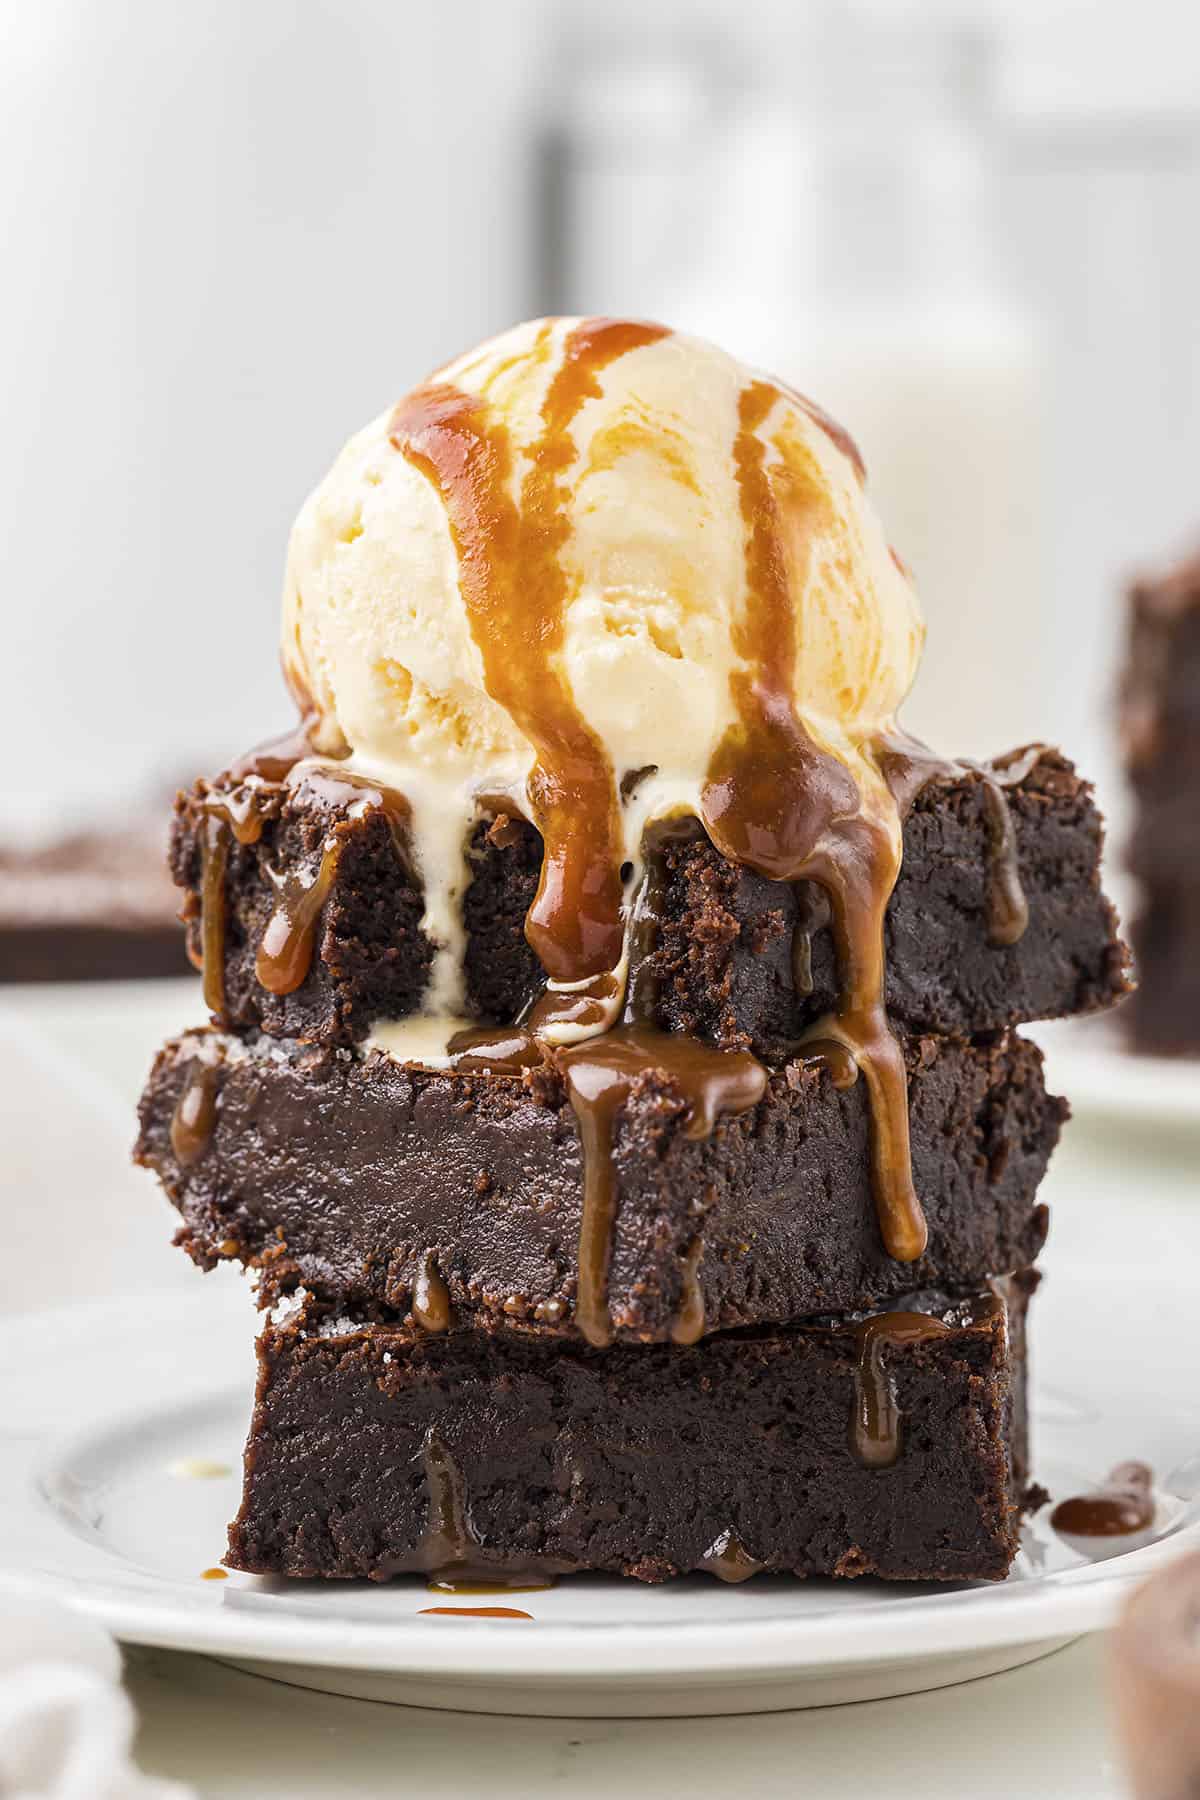 Stack of brownies topped with ice cream and caramel sauce.